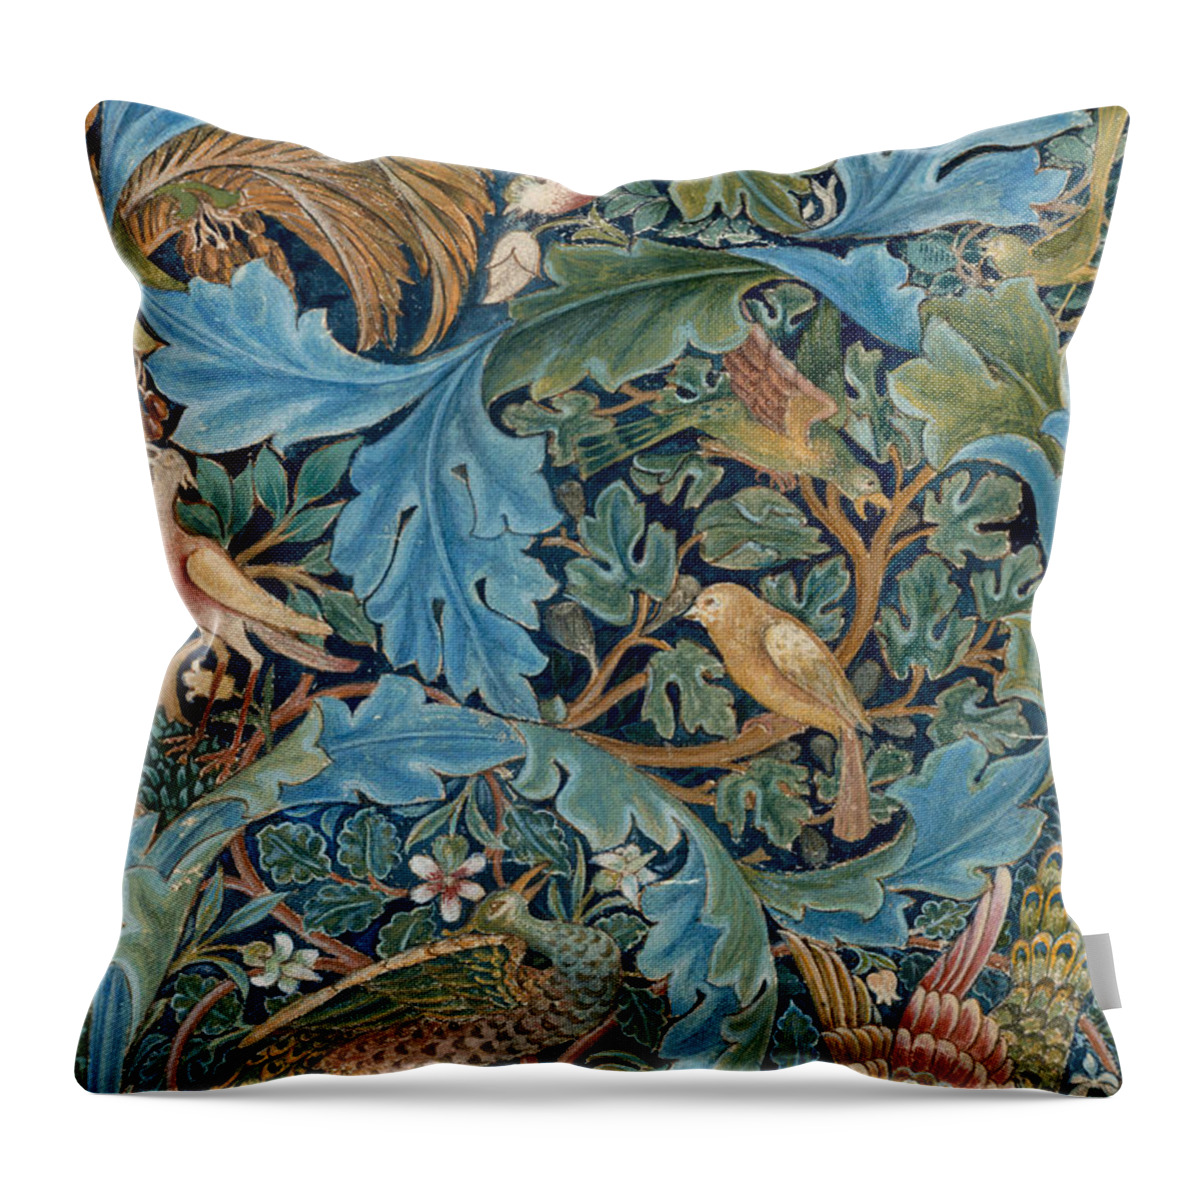 William Morris Throw Pillow featuring the painting Design for tapestry by William Morris